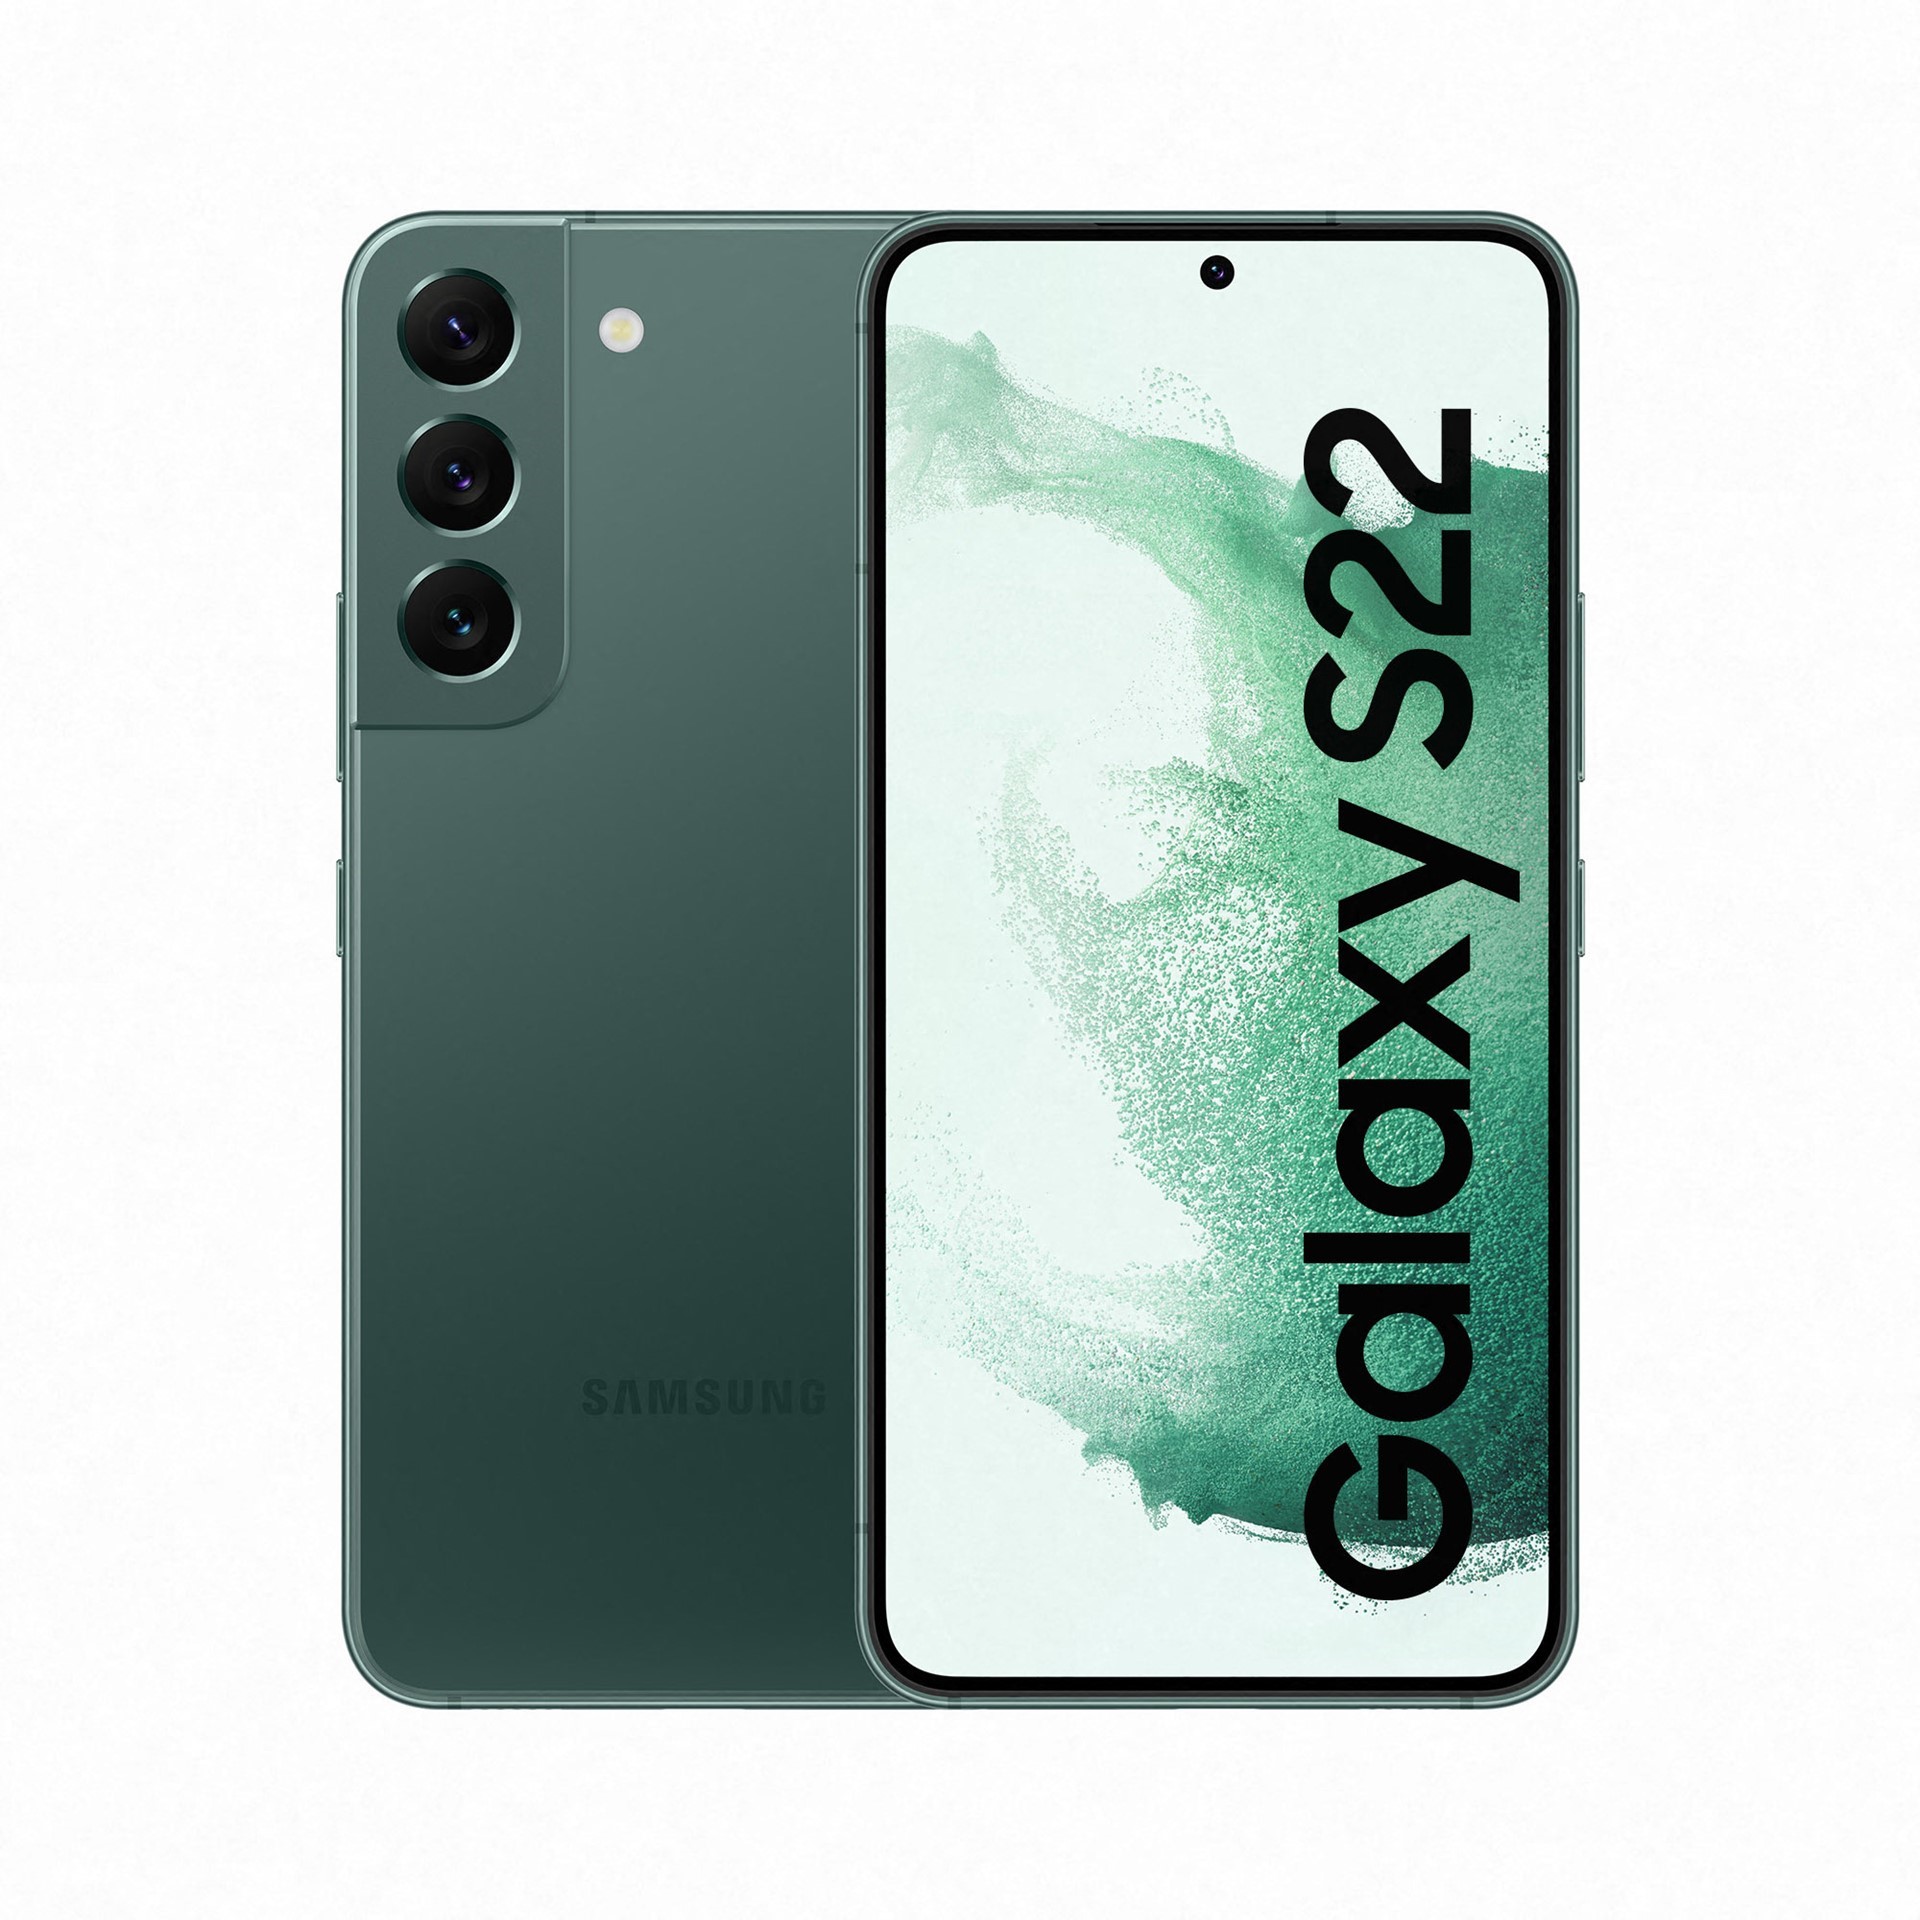 SA-SM-S901BZGD 5G green smartphone, 128GB storage, 6.1-inch FHD+ Dynamic AMOLED 2X Display, 50MP High Resolution Camera, Epic images and lightning fast response, Powerful 3,700 mAh battery.